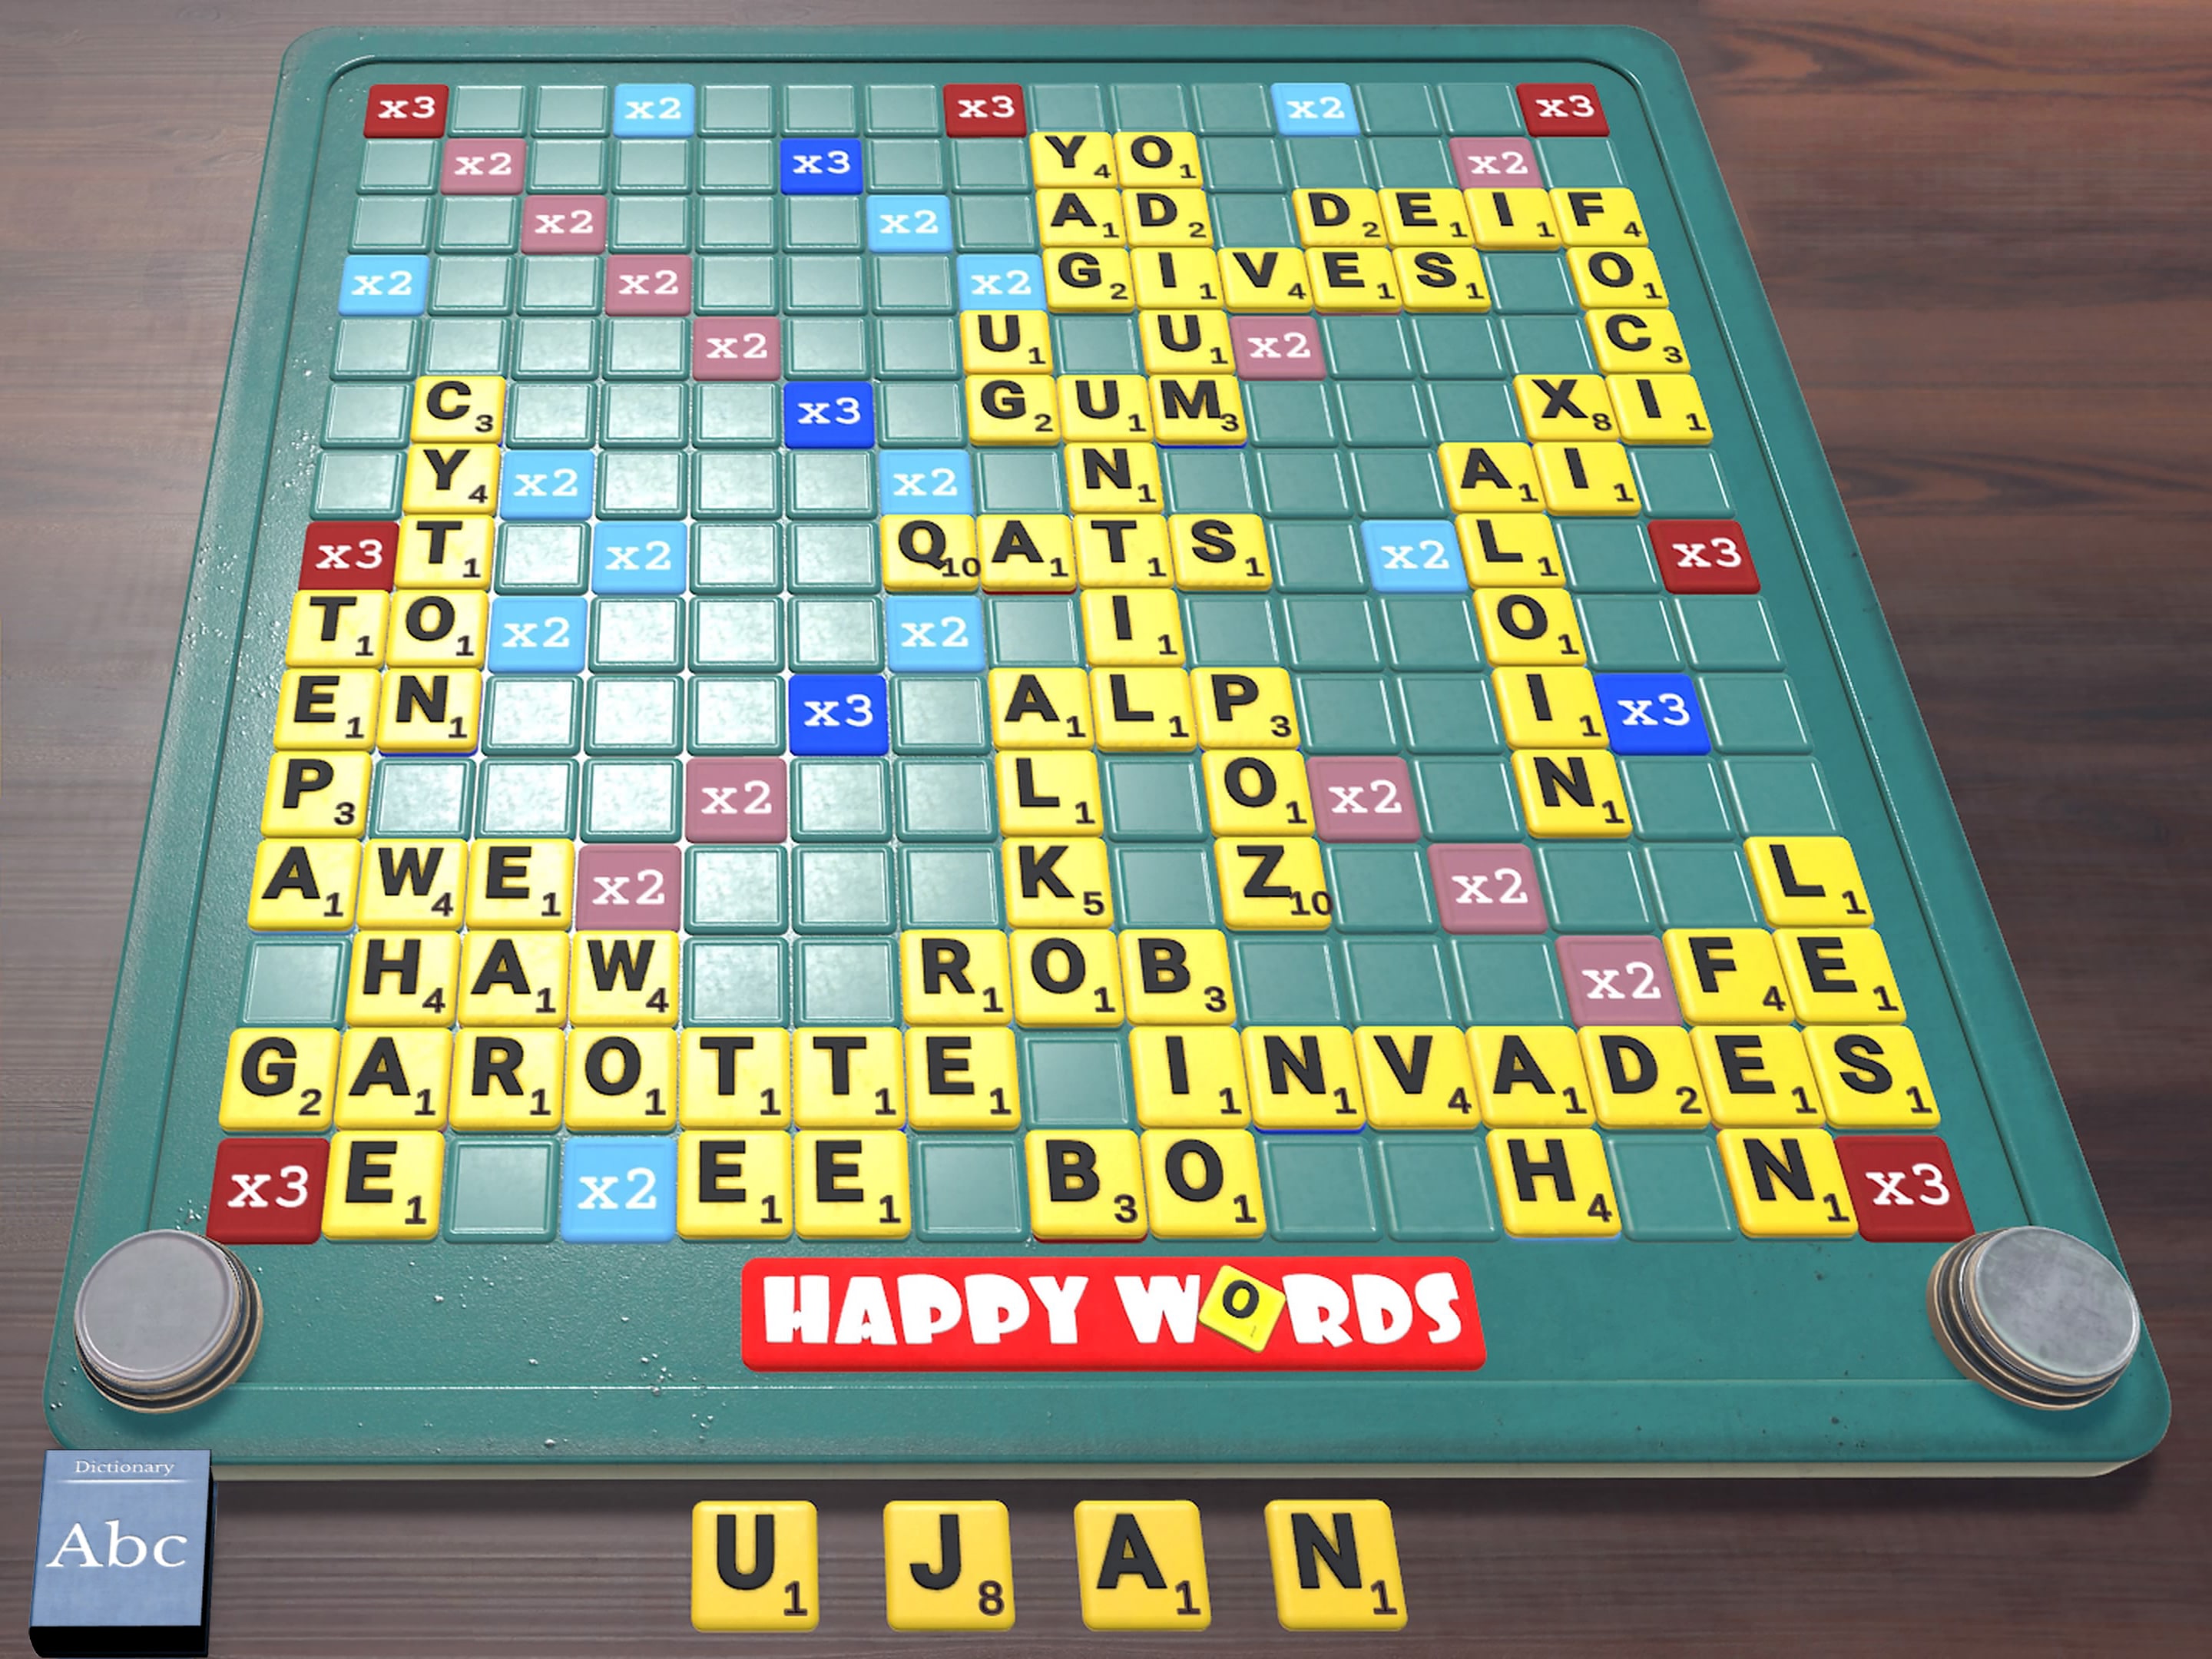 Board Games Online - Happy Words is our most popular game. It is